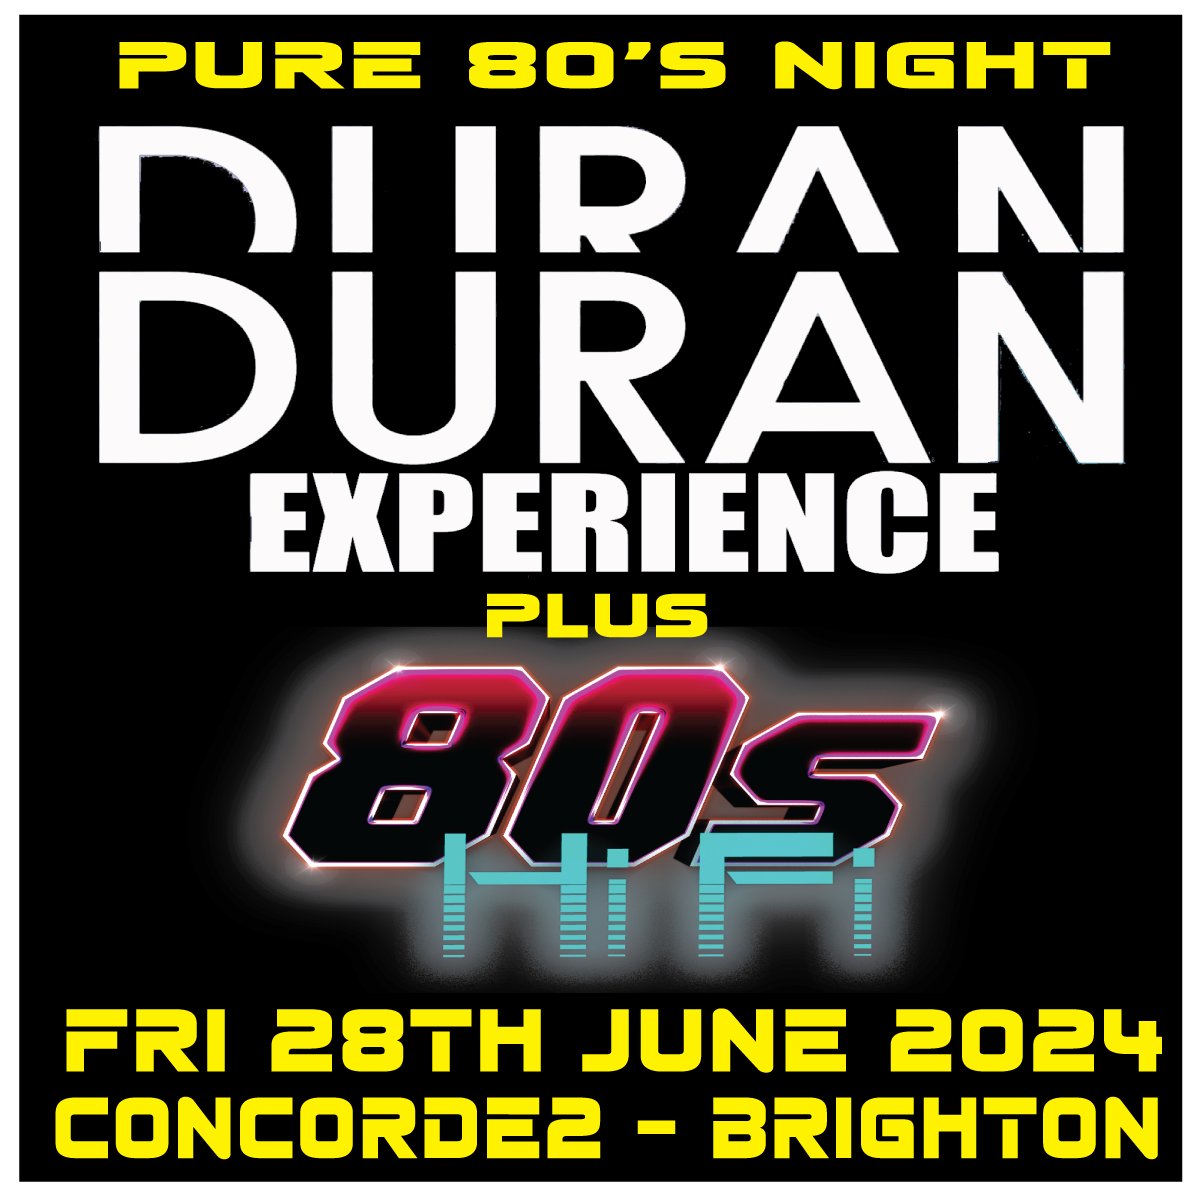 🪩🪩 Coming Soon 🪩🪩 The DURAN DURAN Experience & 80s HiFi are heading to C2 in a few weeks for the ultimate pure 80's night. Grab your tickets today and we will see you on the dance floor. Tickets available from concorde2.co.uk